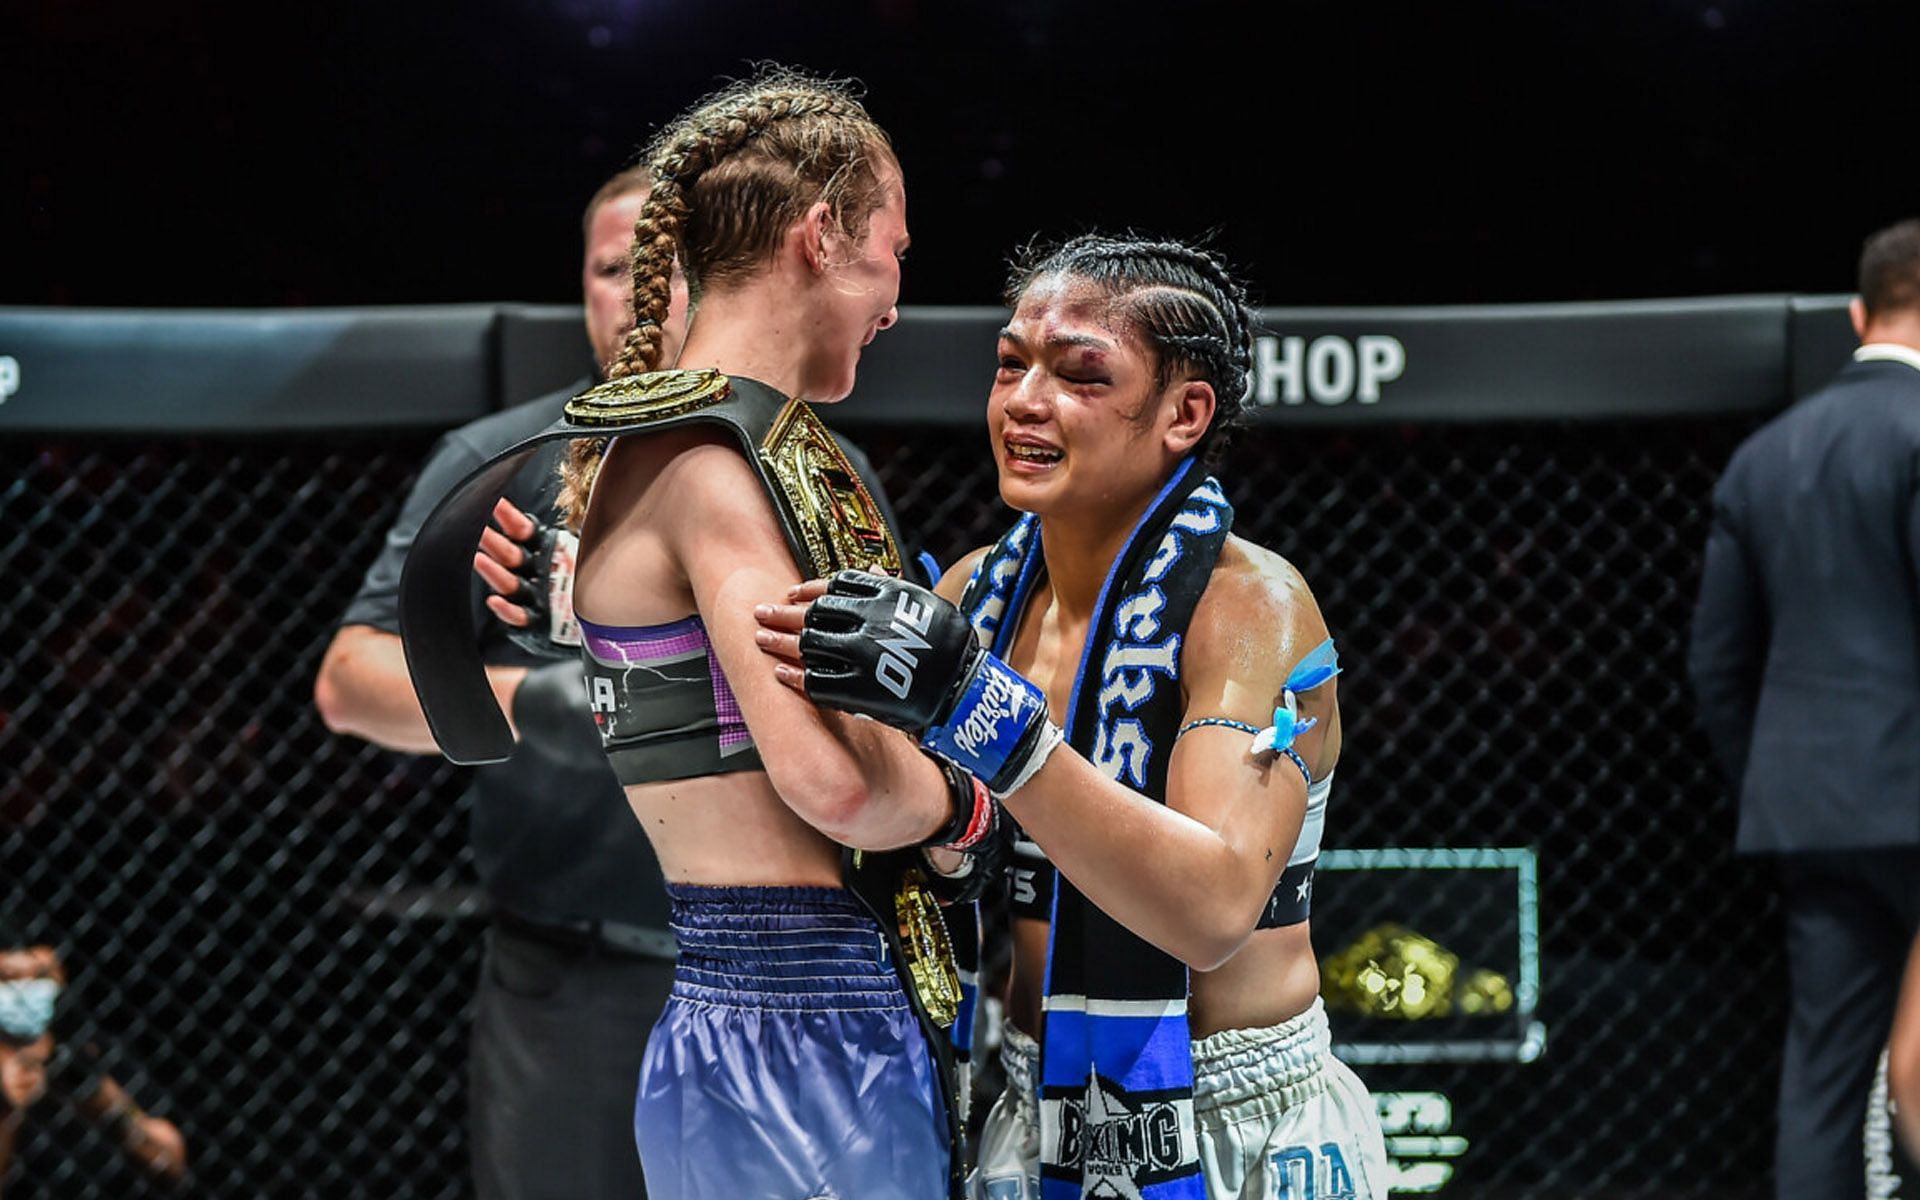 Jackie Buntan (R) congratulates Smilla Sundell (L) after their world title bout at ONE 156. | [Photo: ONE Championship]